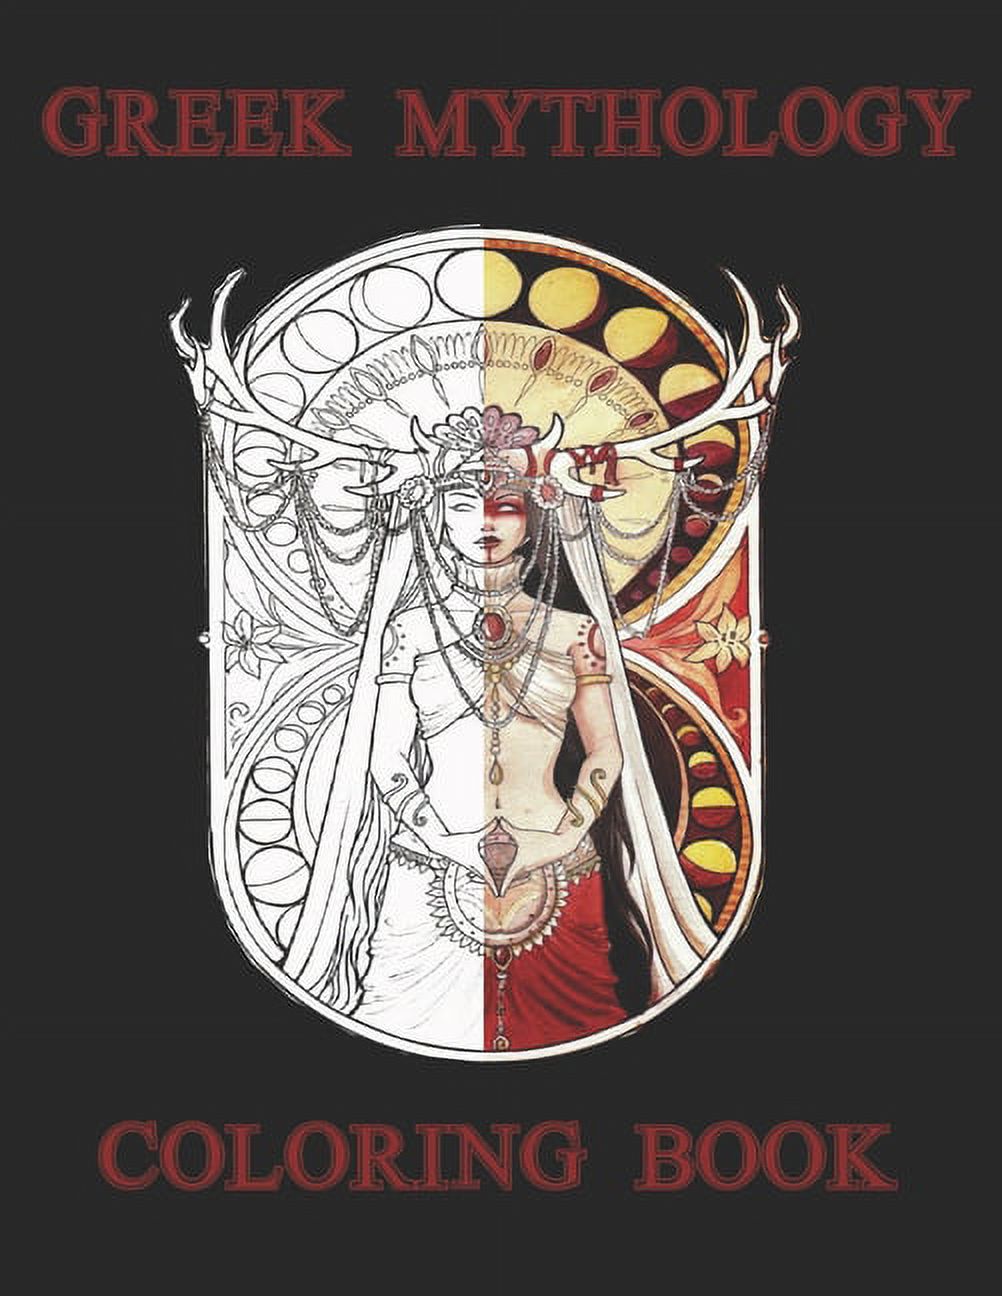 greek mythology coloring book: An Coloring Book with Powerful Greek Gods, Beautiful Greek Goddesses, Mythological Creatures, and the Legendary Heroes of Ancient Greece (Other) - image 1 of 1